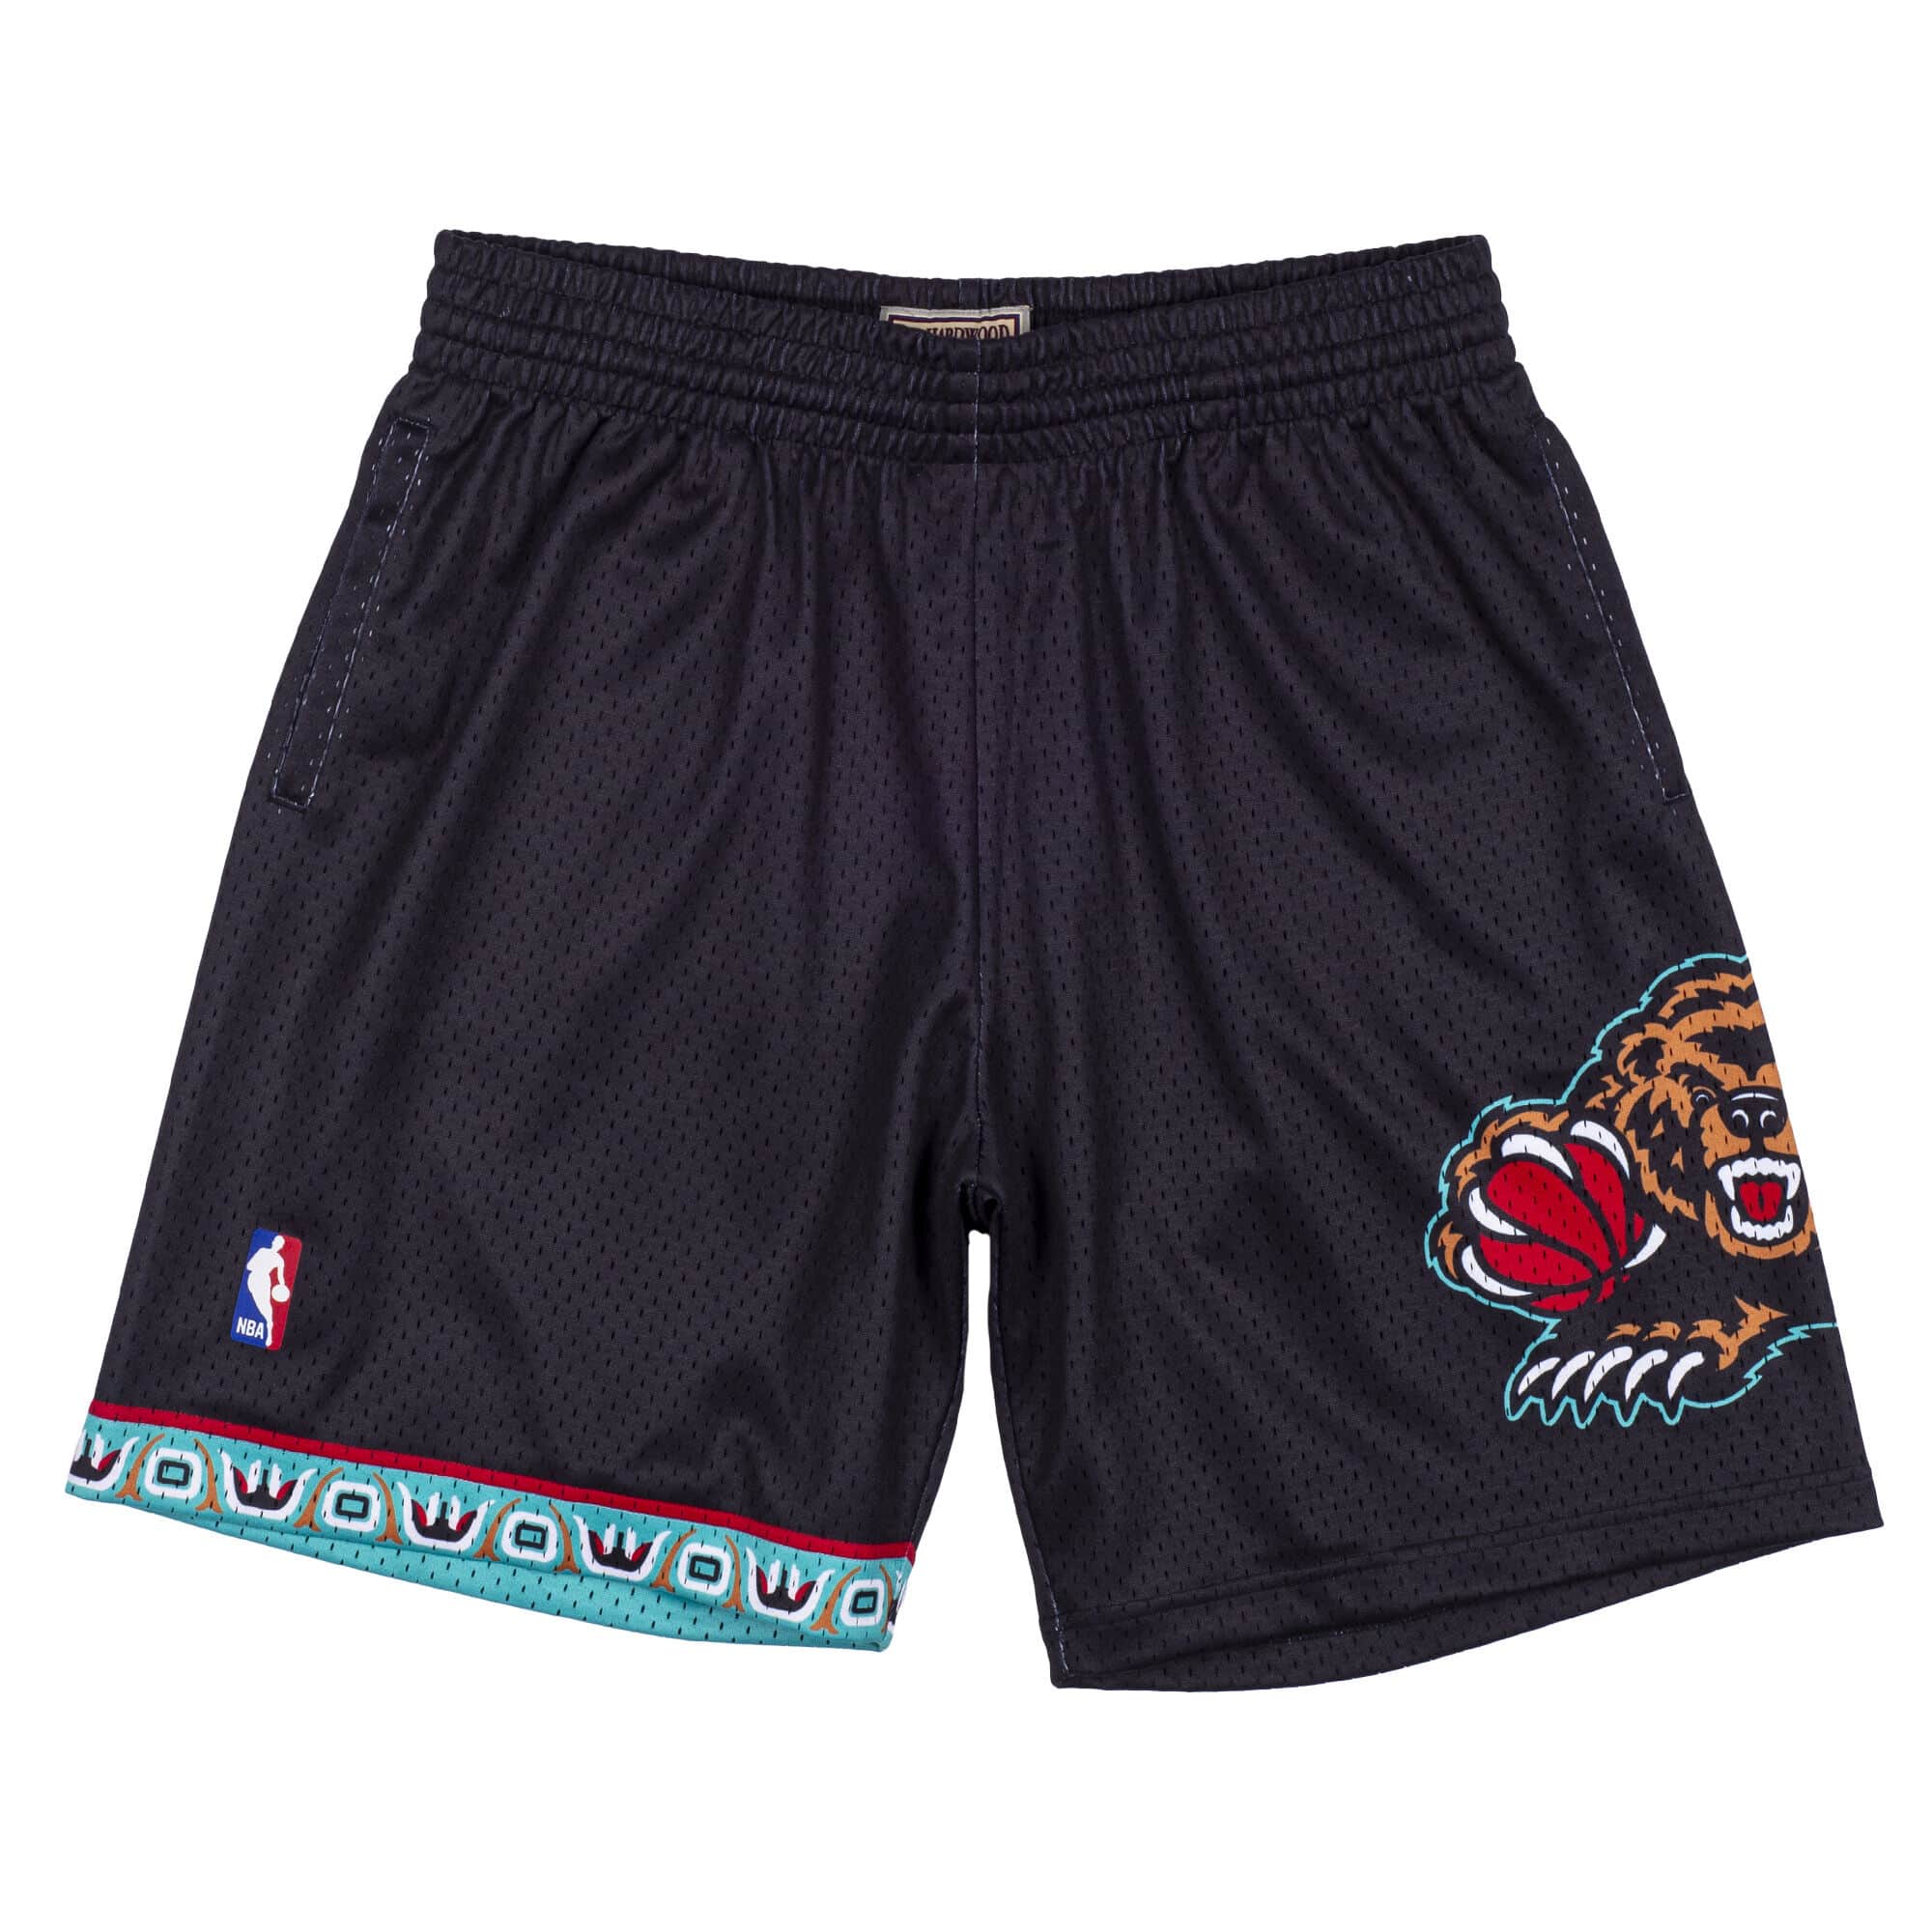 Vancouver Grizzlies Mitchell & Ness Hardwood Classics Inaugural